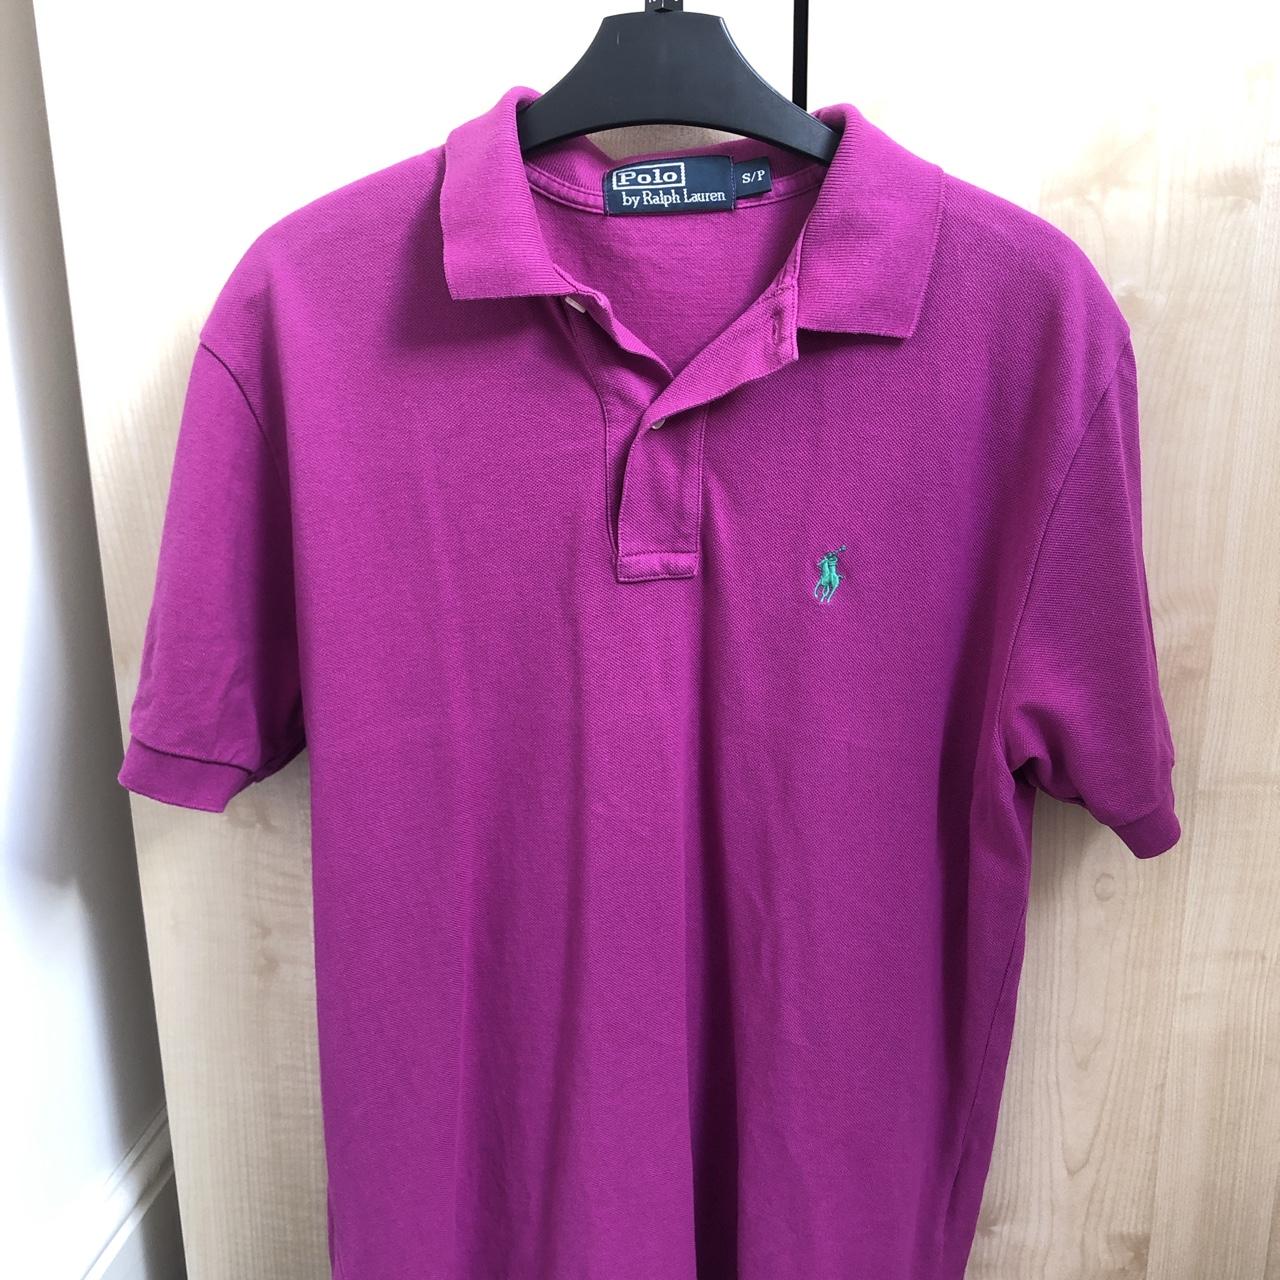 Kanye West style Ralph Lauren Polo shirt in bright - Depop